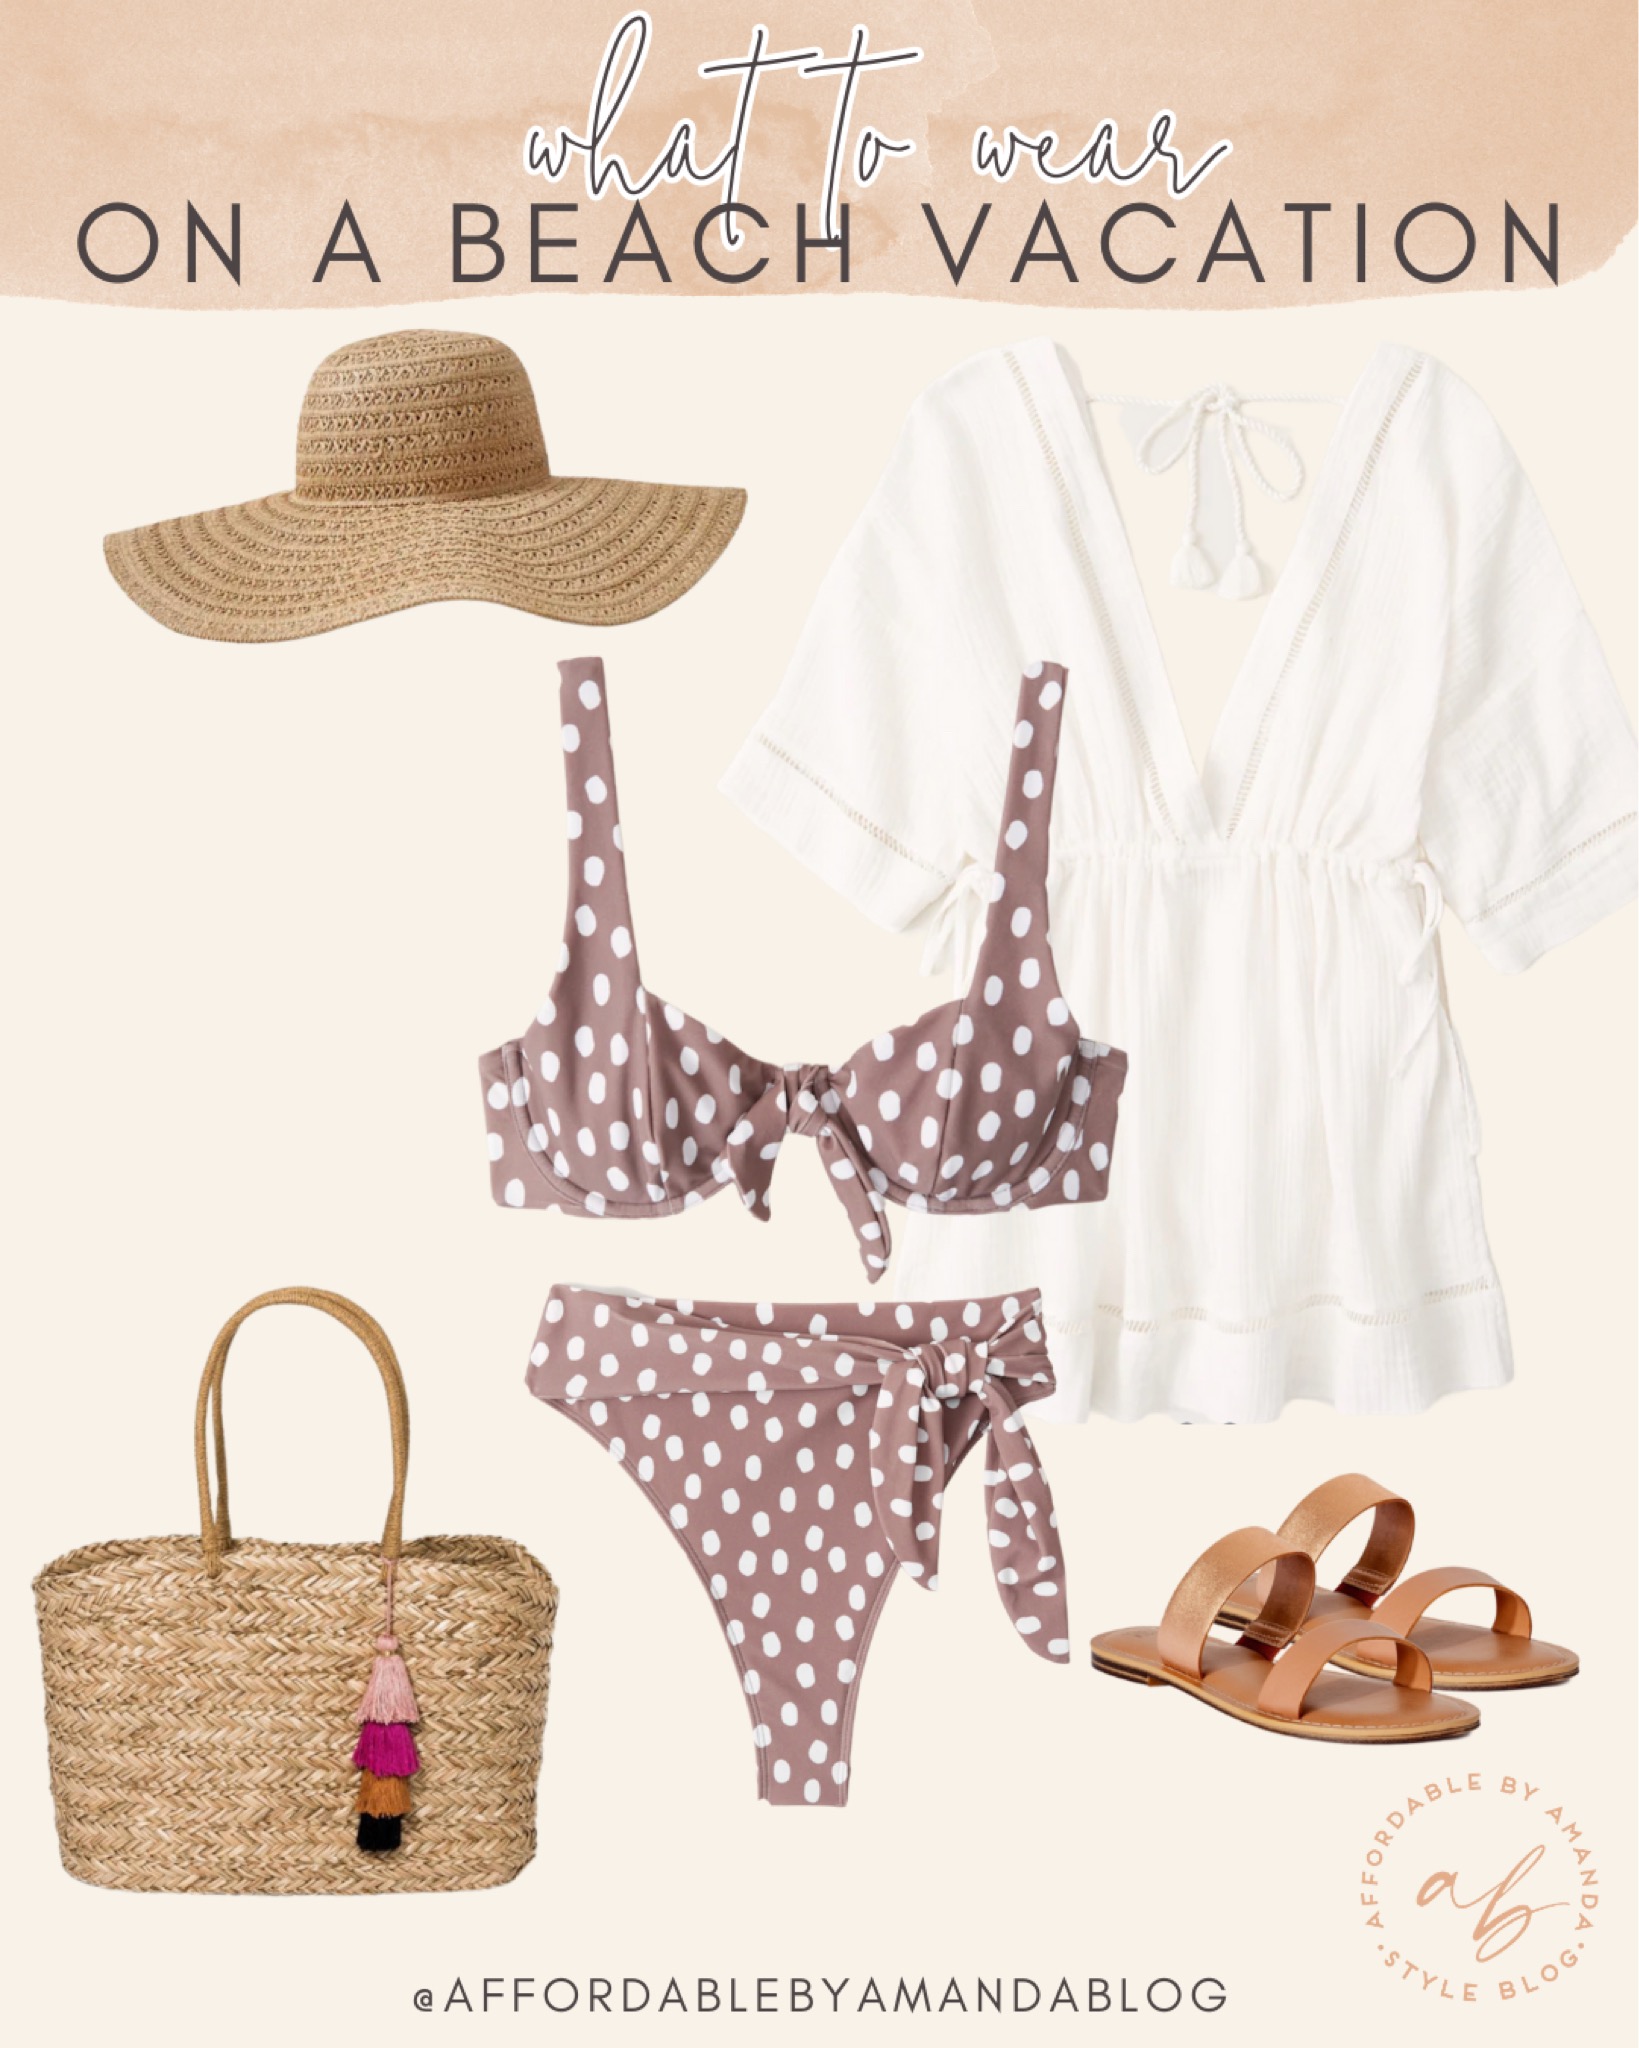 Cute Beach Outfits for Your Summer Outfit Inspiration - Affordable by Amanda shares Beach Outfit Ideas